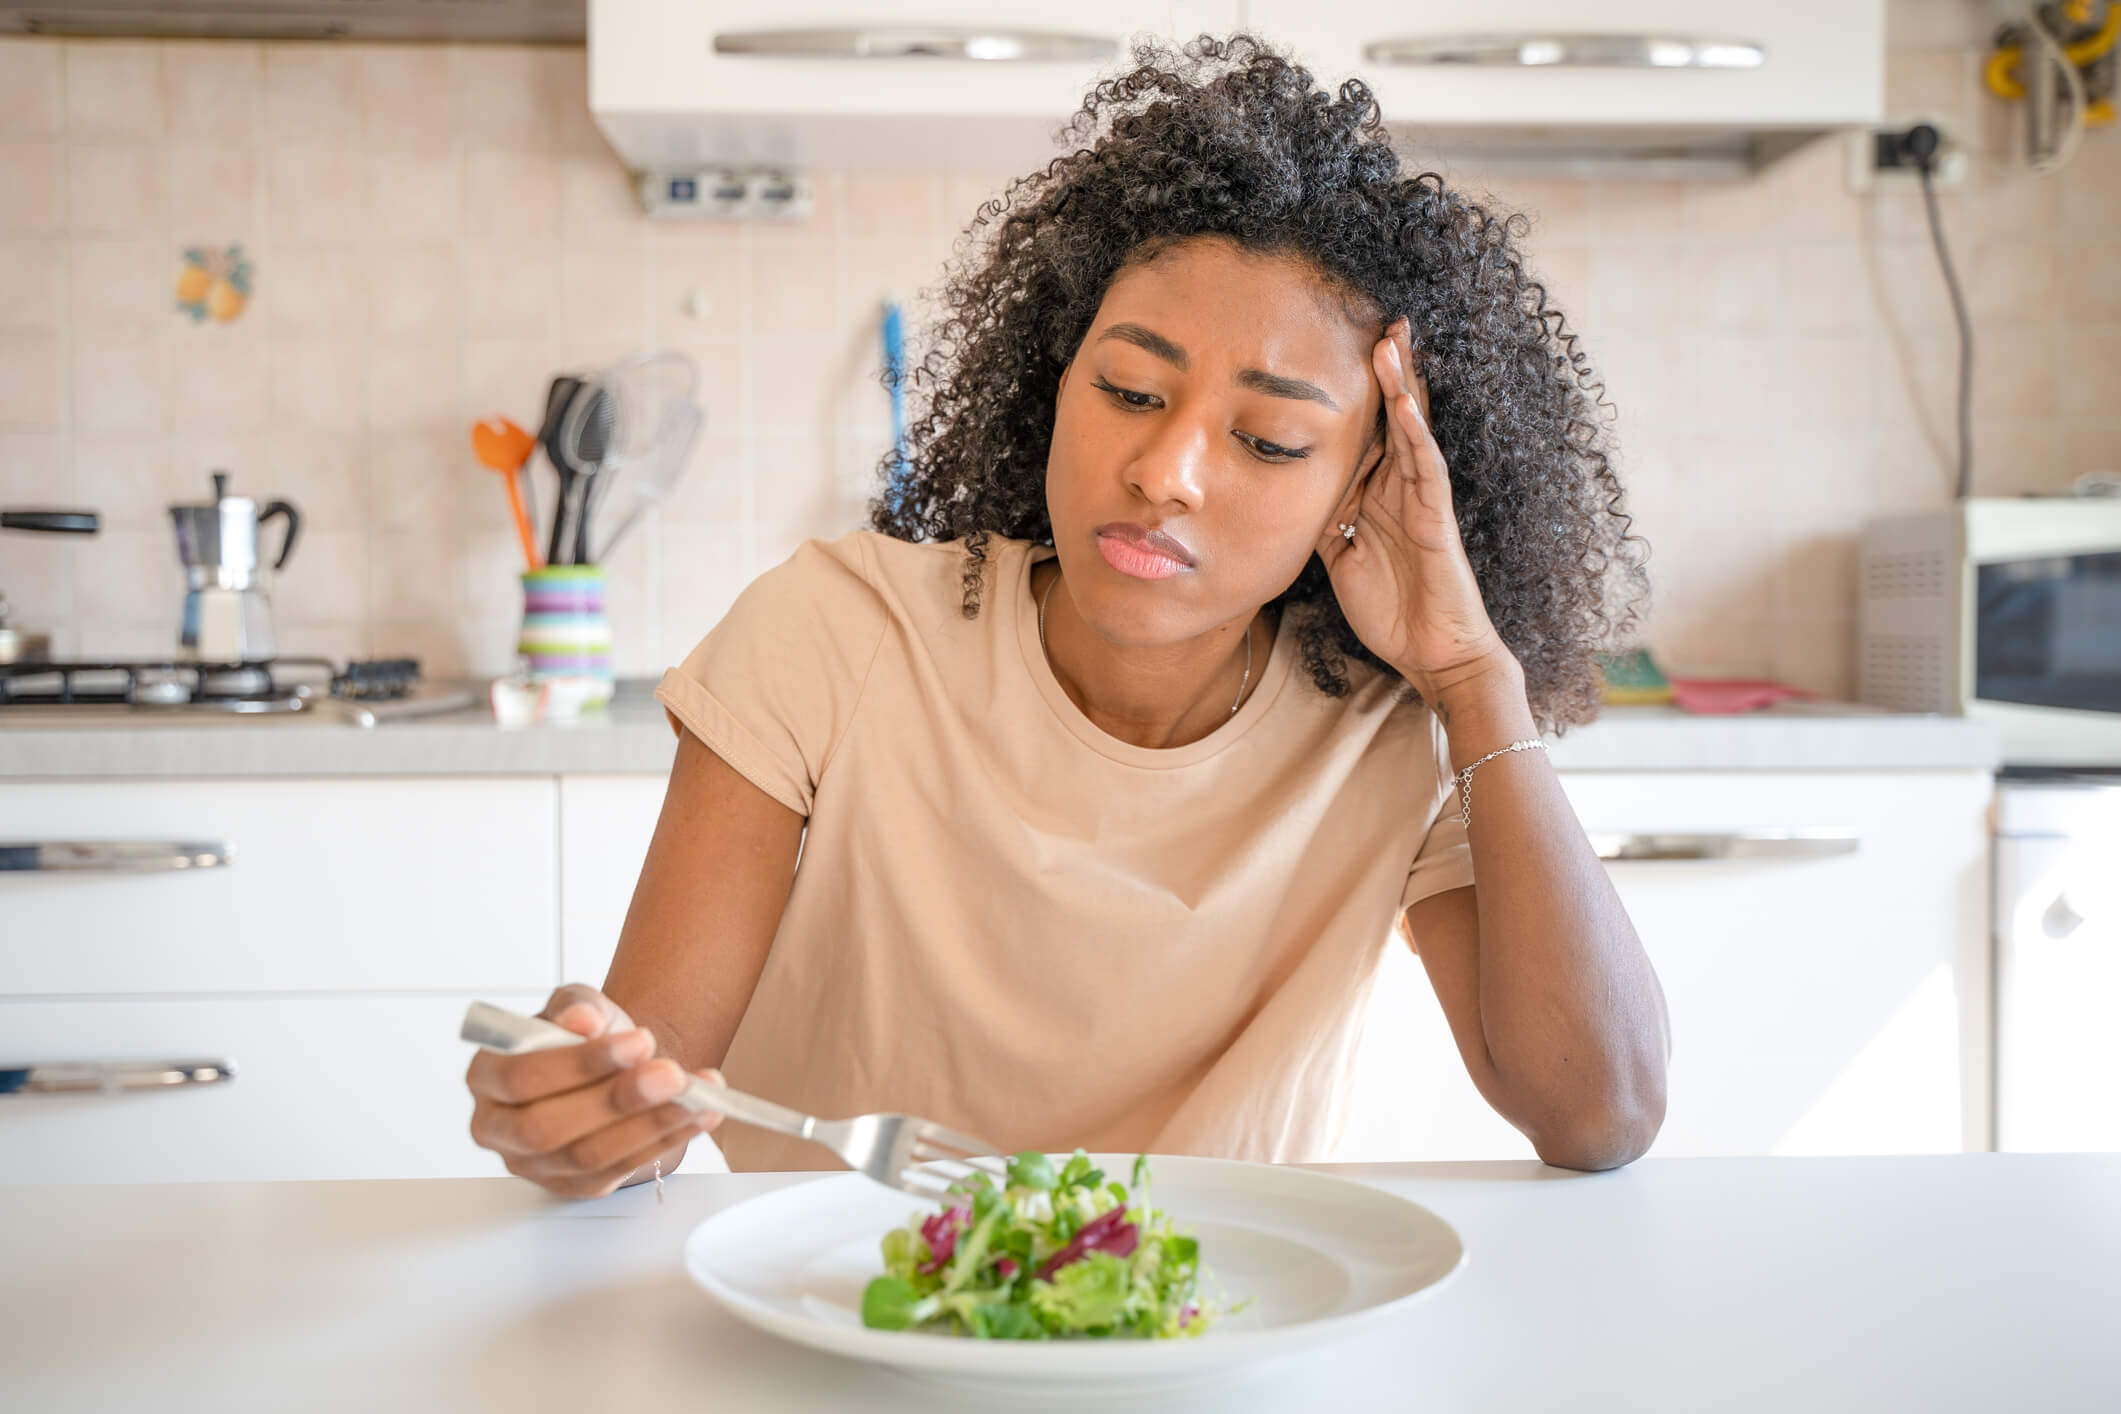 Woman with a distressed expression looking down at a salad while holding a fork and sitting at a dinner table.